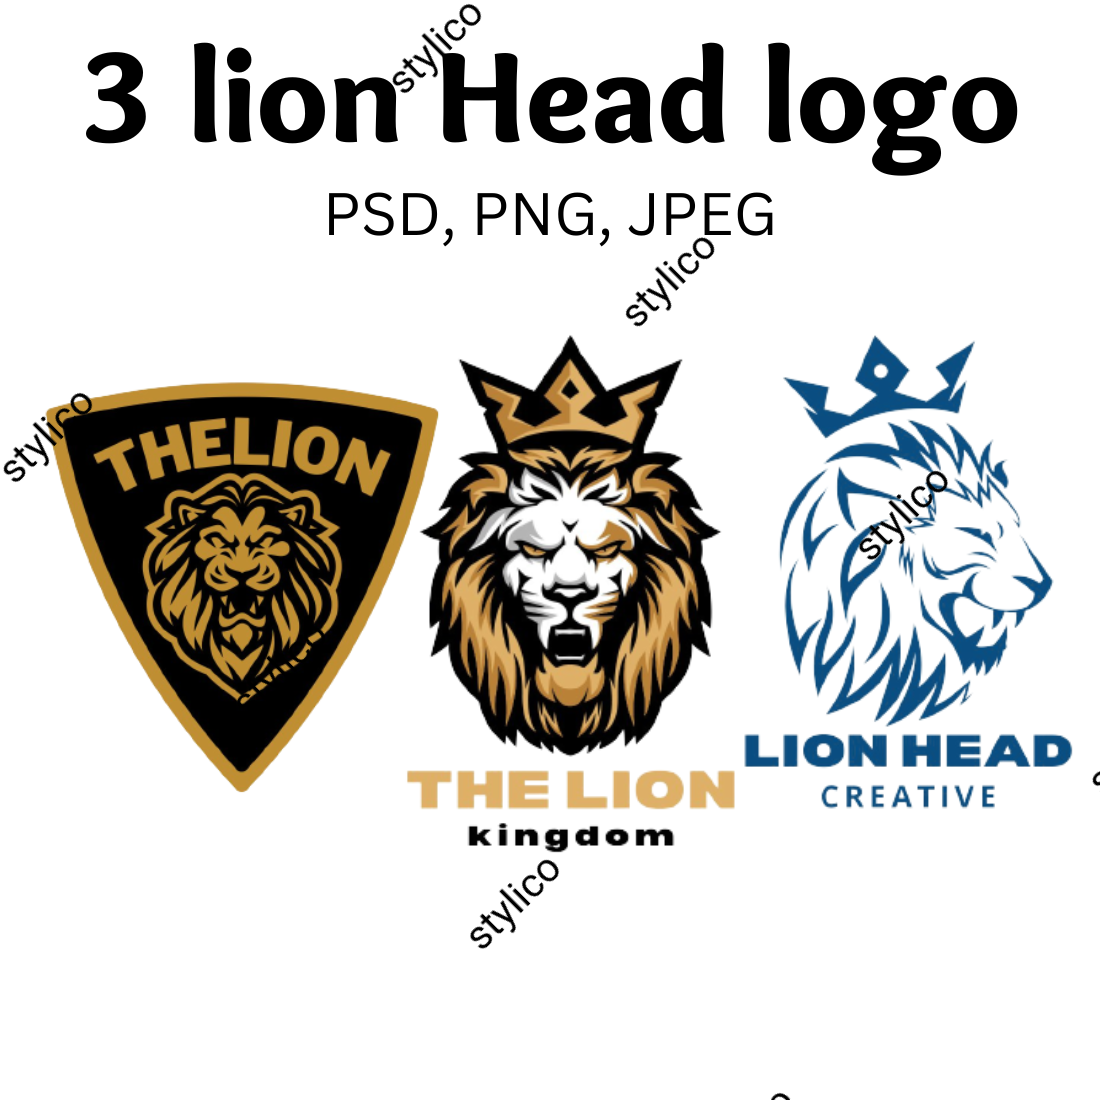 The lion head logo is shown in three different colors.